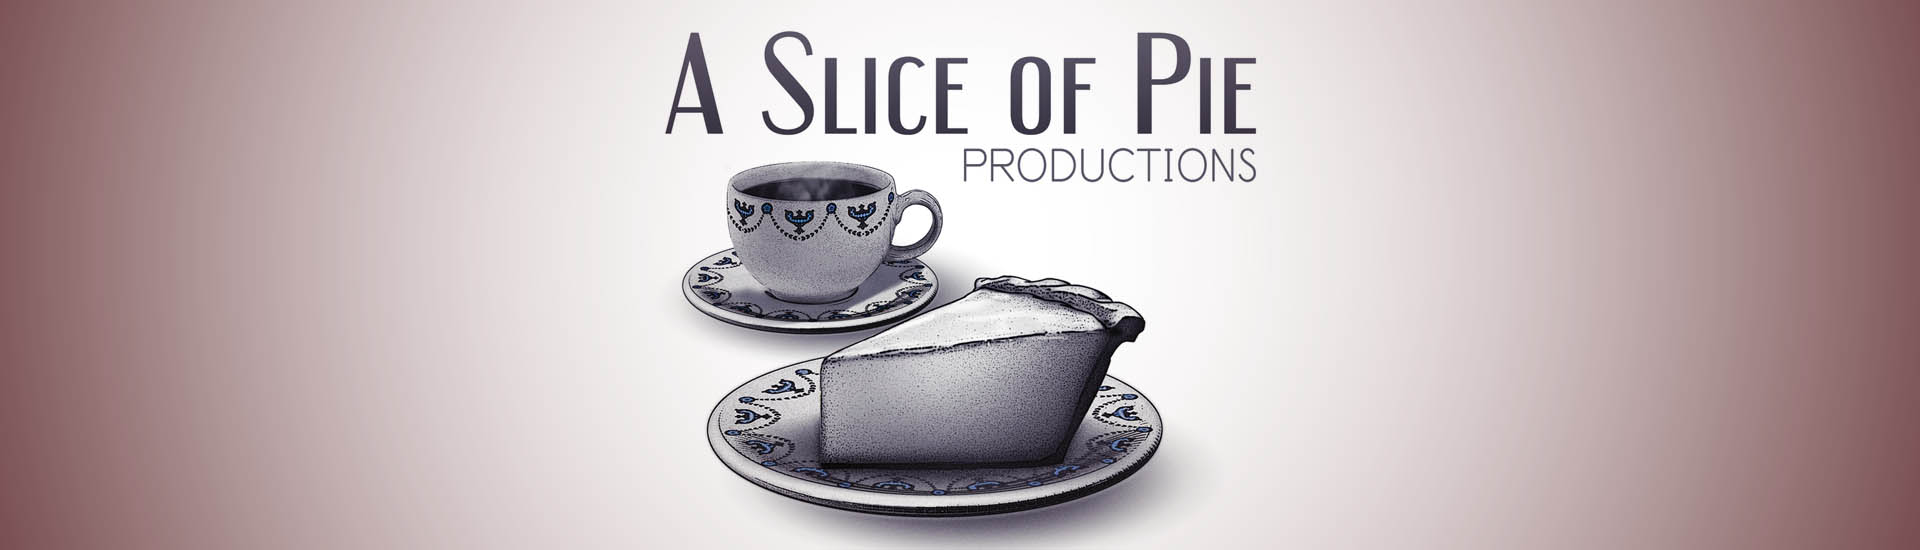 Image for A Slice of Pie Productions